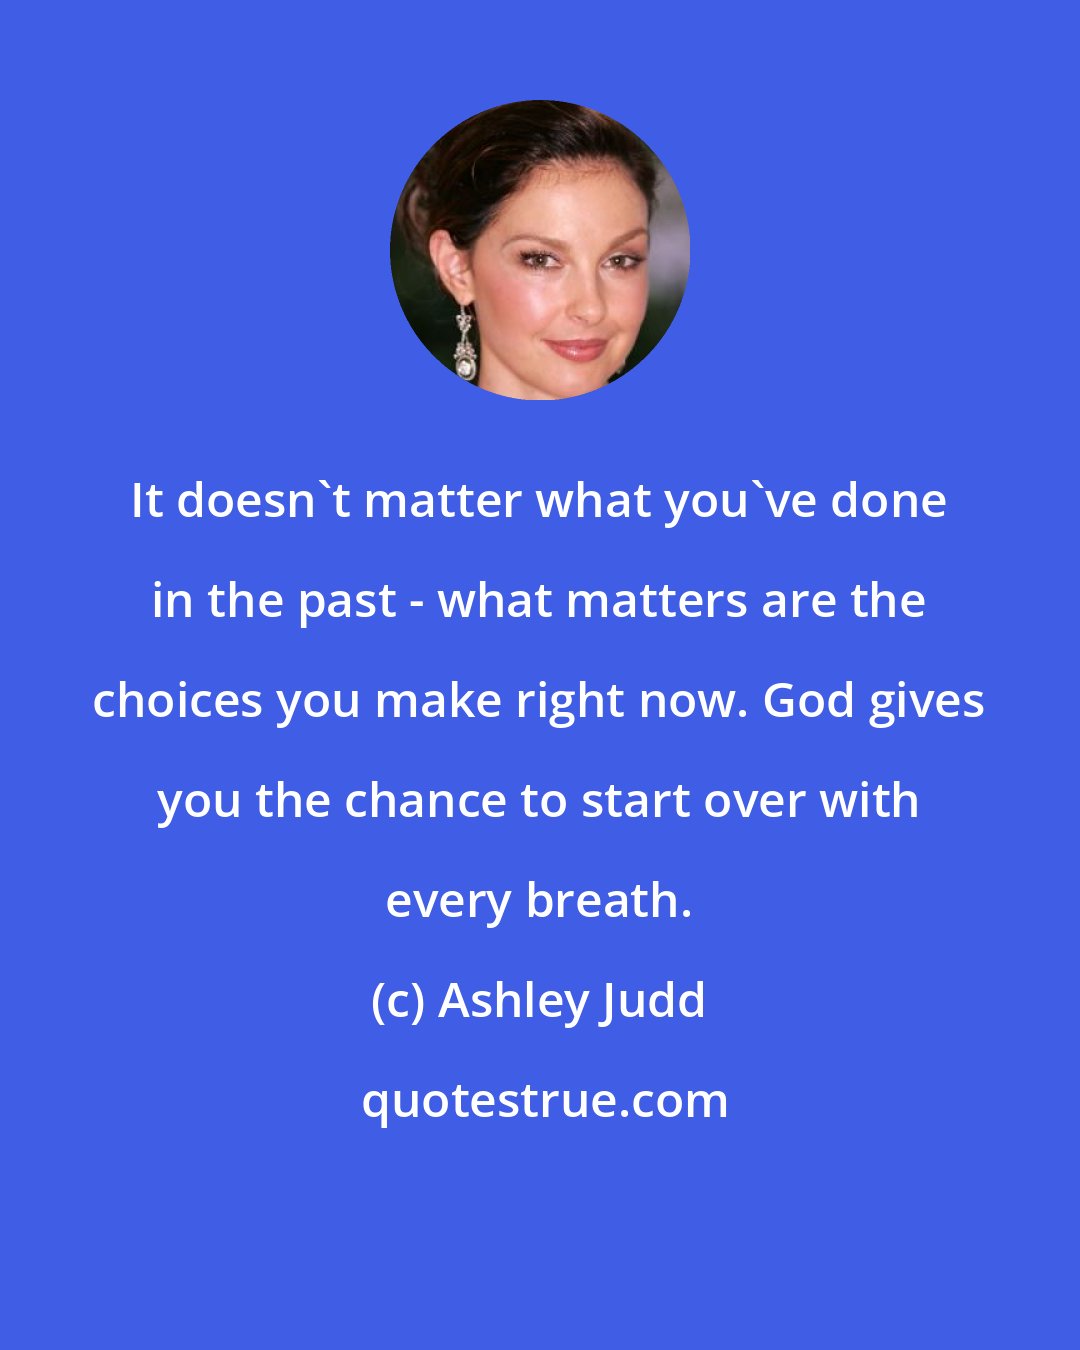 Ashley Judd: It doesn't matter what you've done in the past - what matters are the choices you make right now. God gives you the chance to start over with every breath.